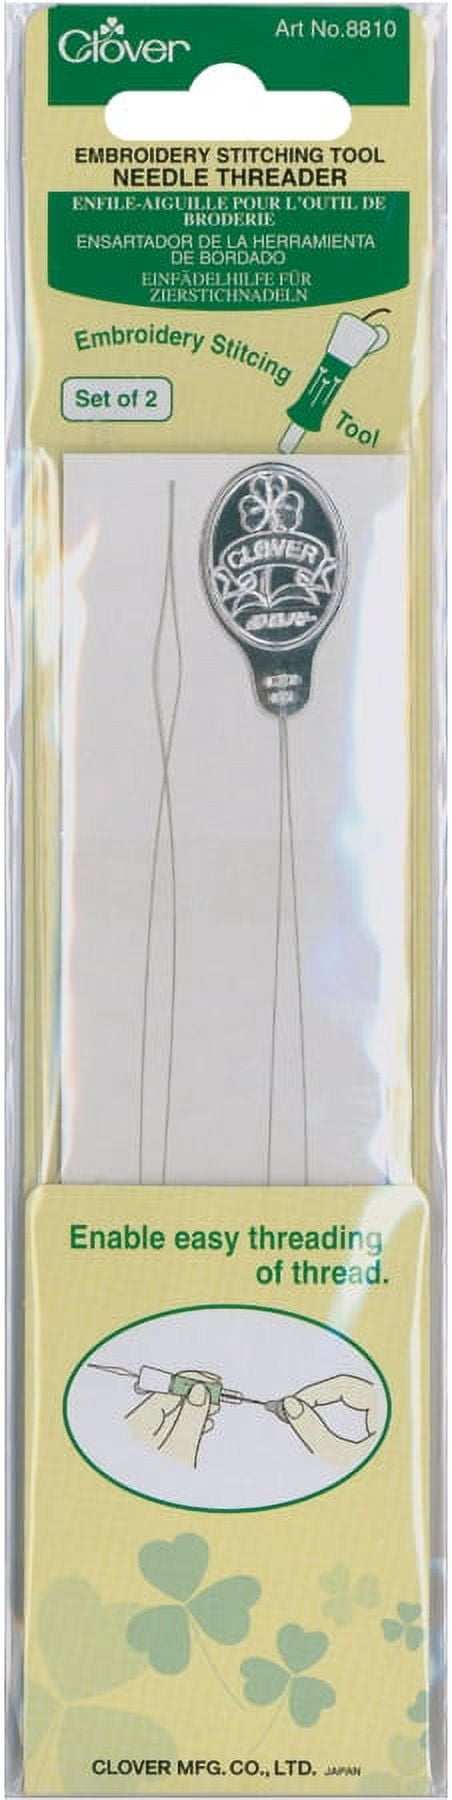 Embroidery Stitching Tool Needle Threaders-2/Pkg 